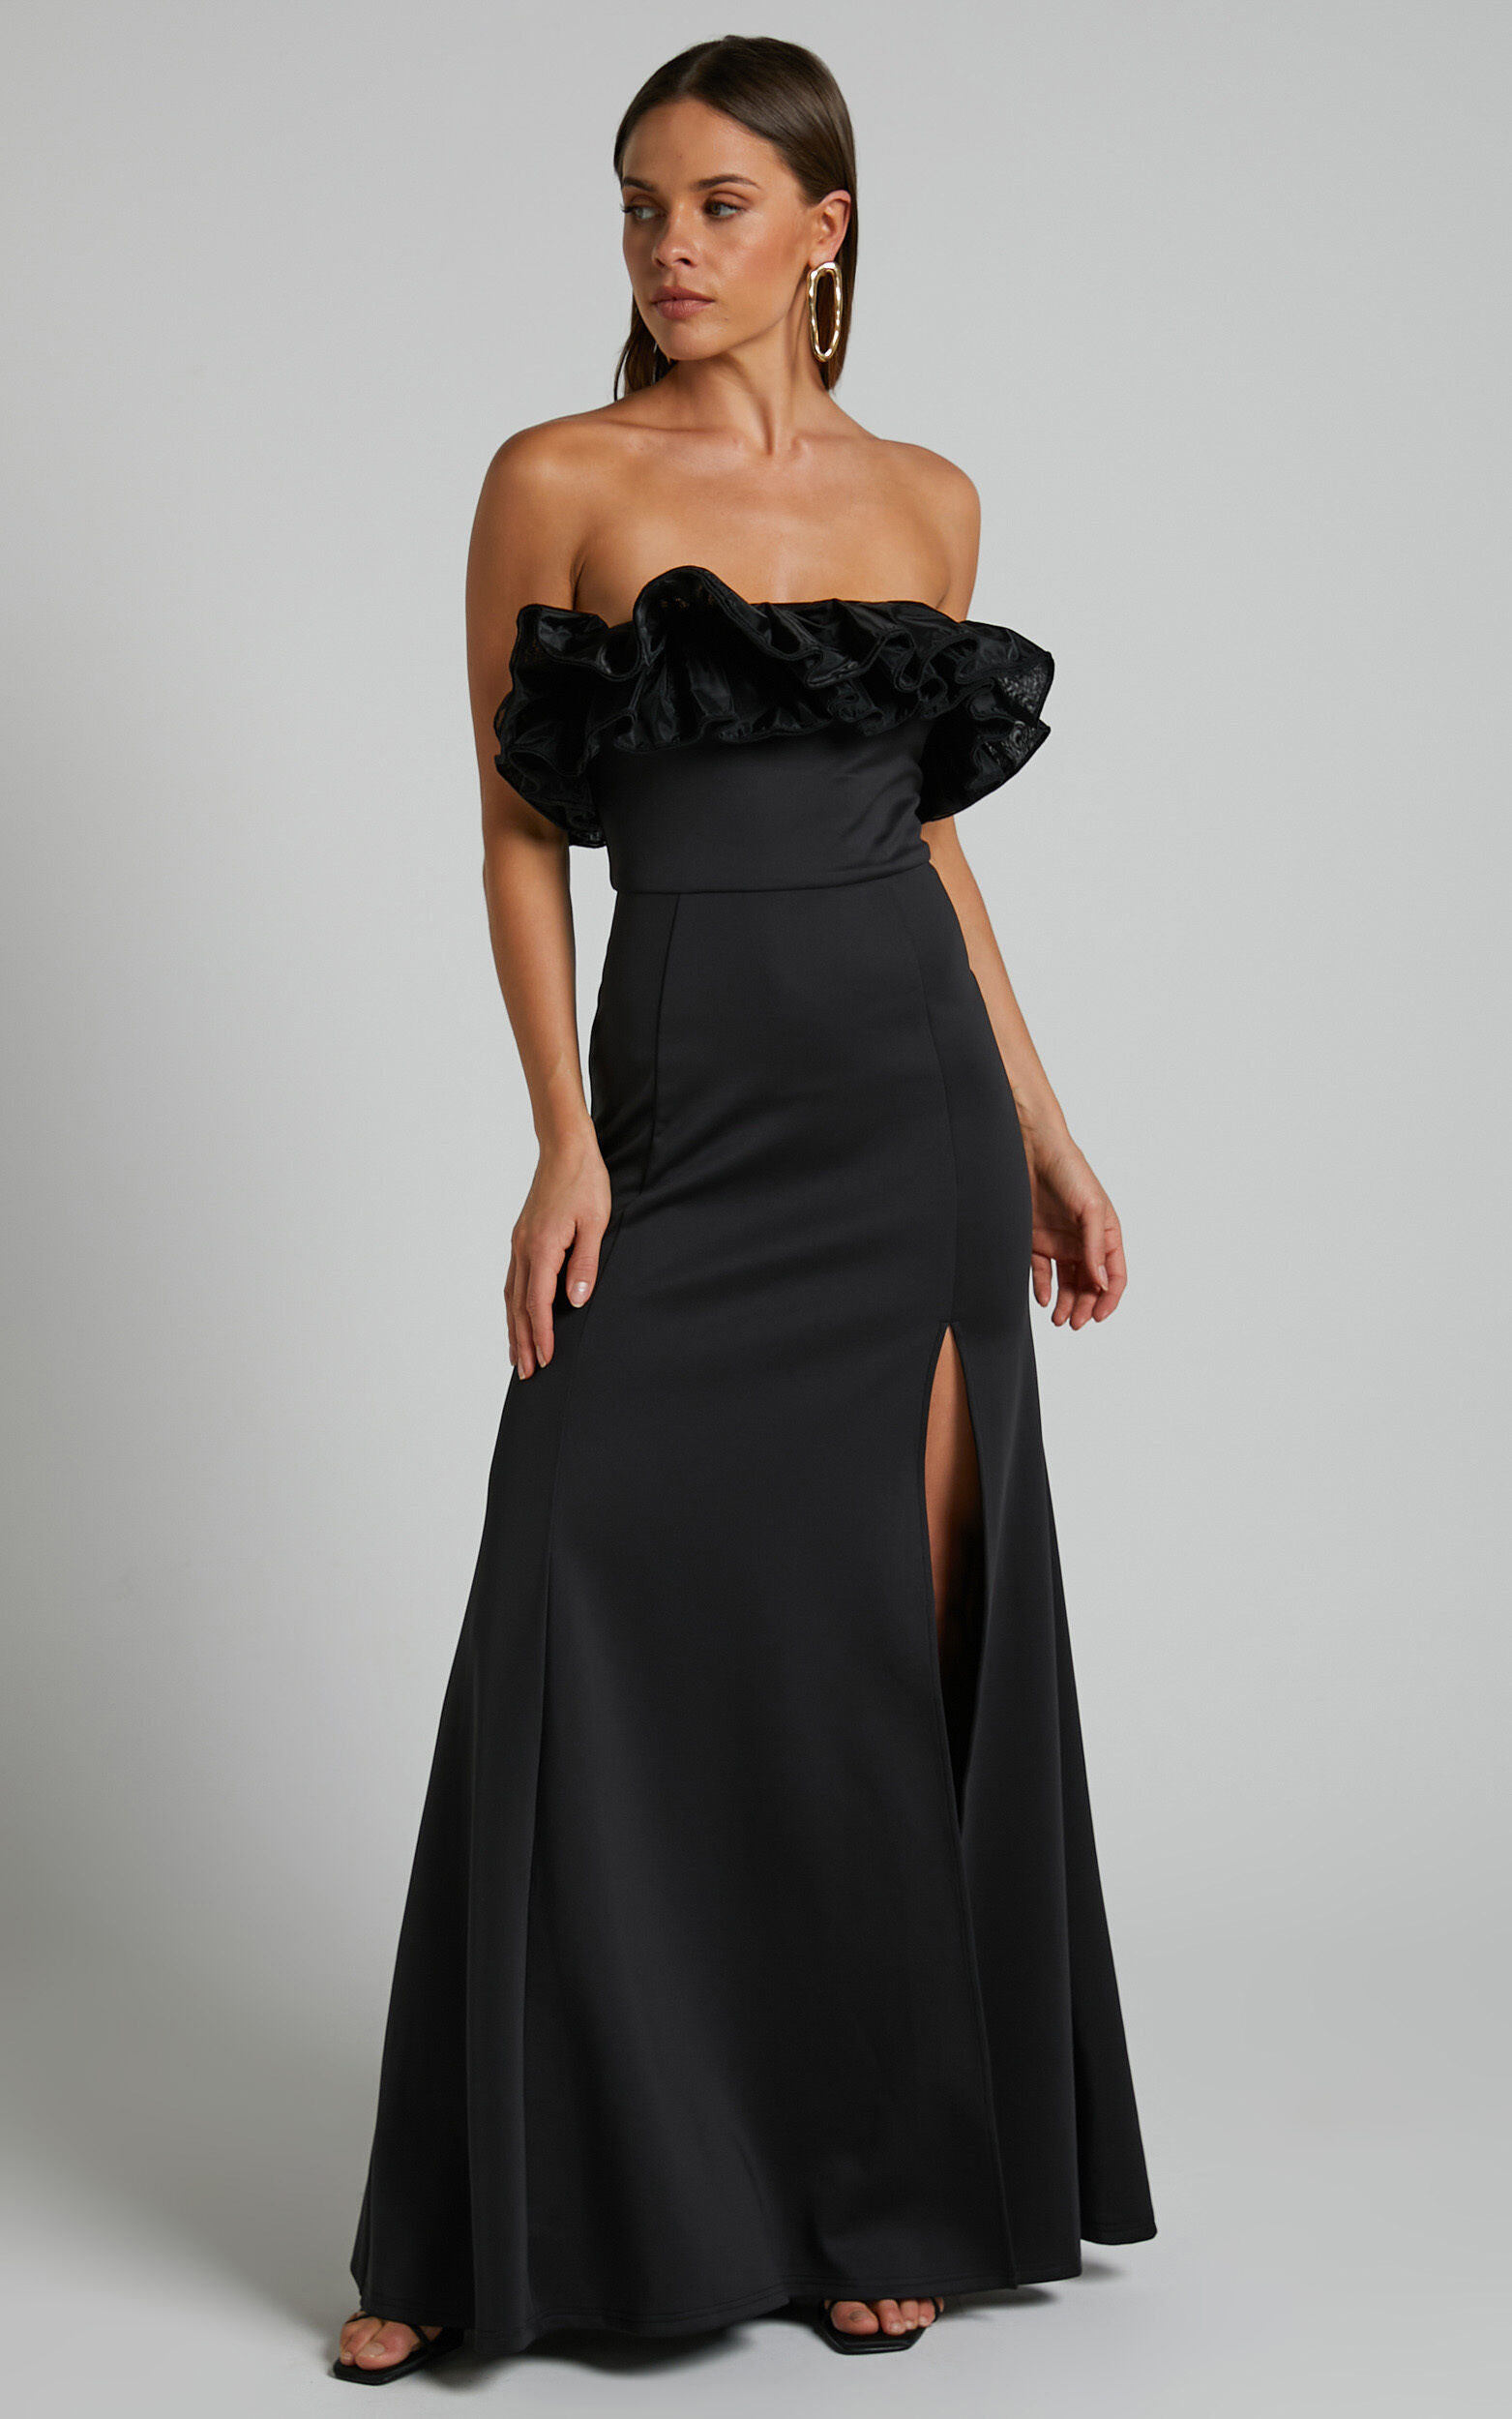 Cassius Gown - Off Shoulder Ruffle Ball Gown Dress in Black - 06, BLK1